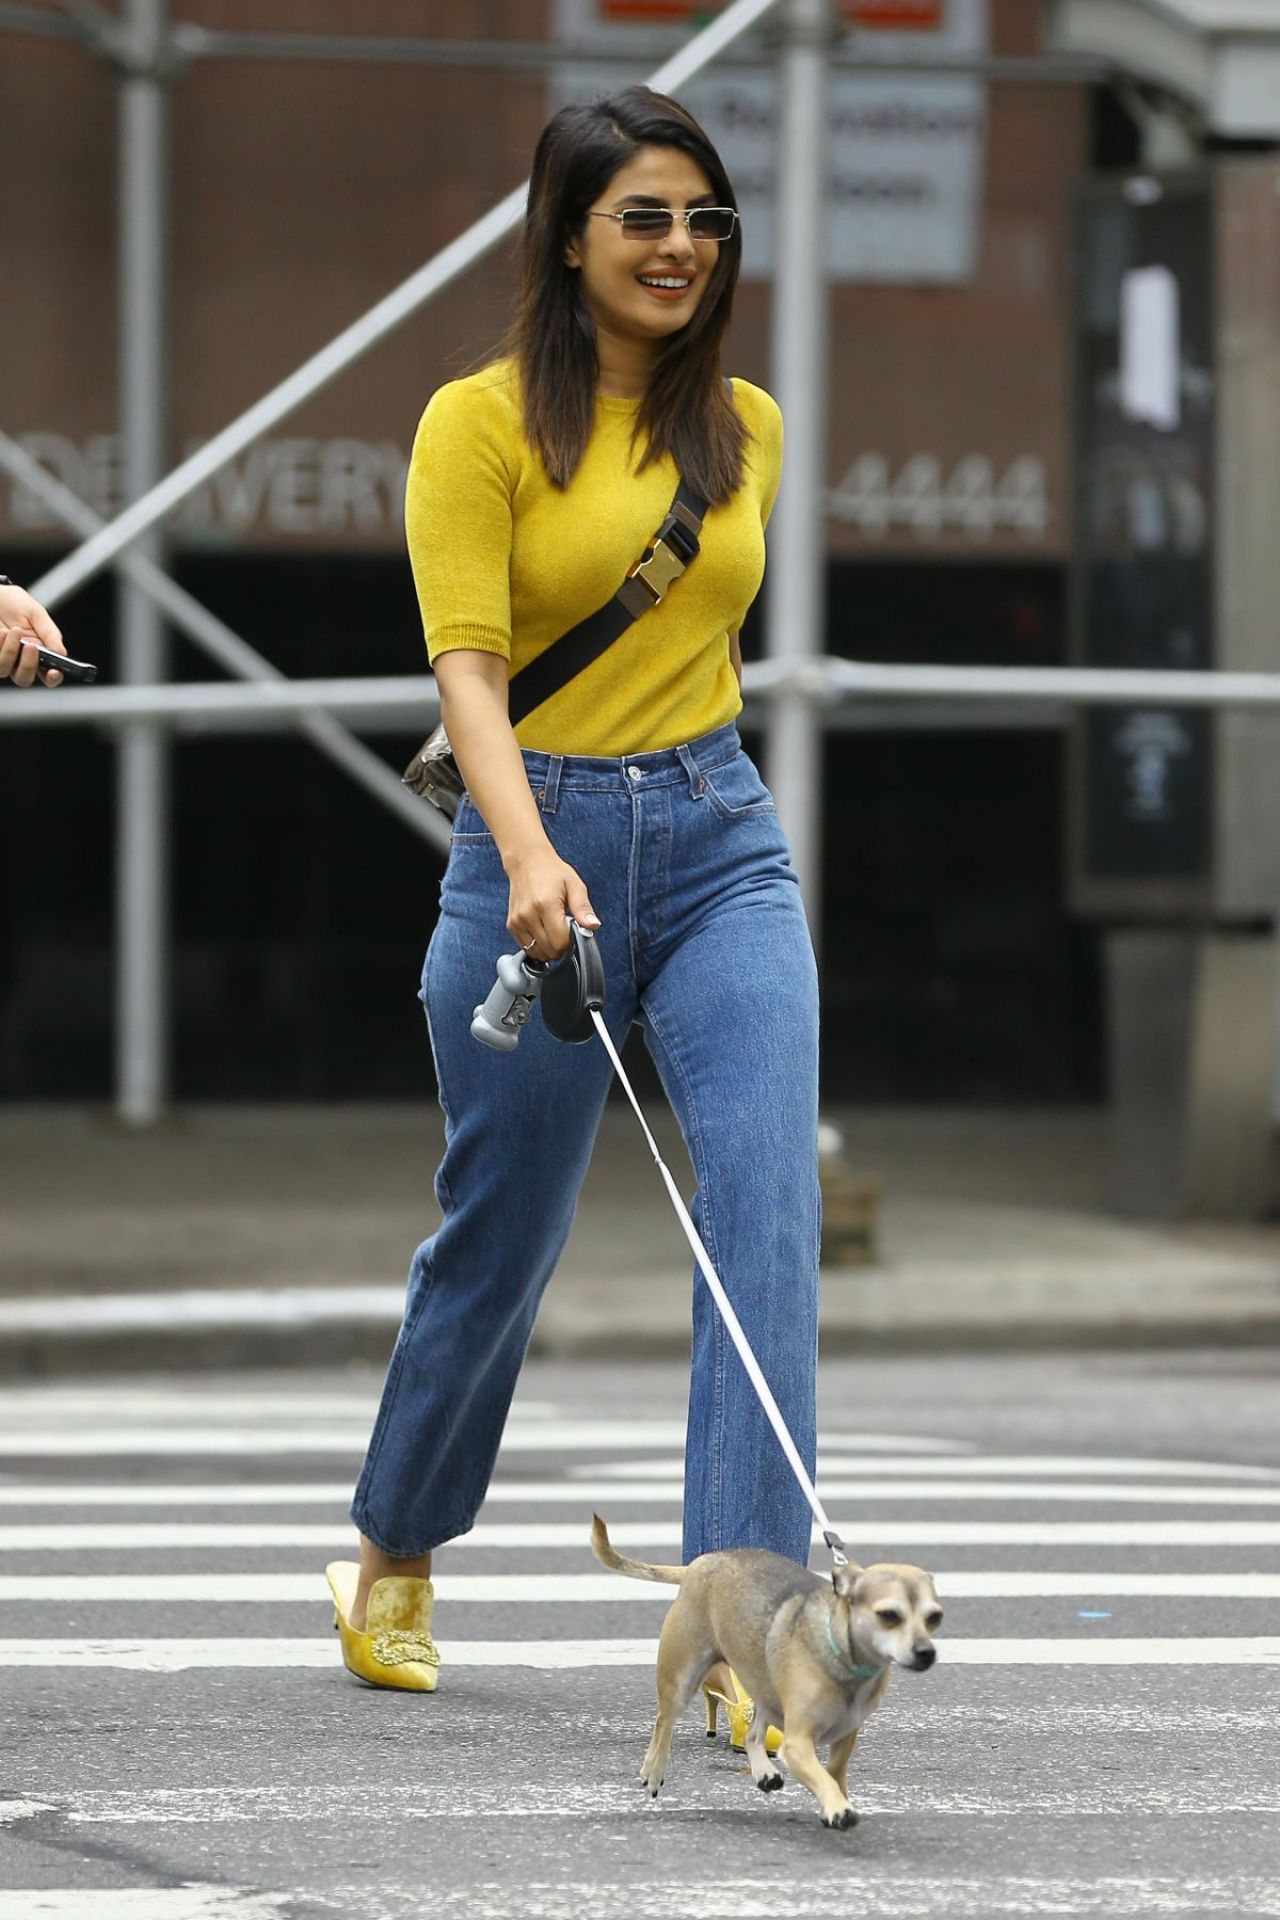 priyanka-chopra-casual-style-out-with-her-dog-in-nyc-10-10-2018-6.jpg